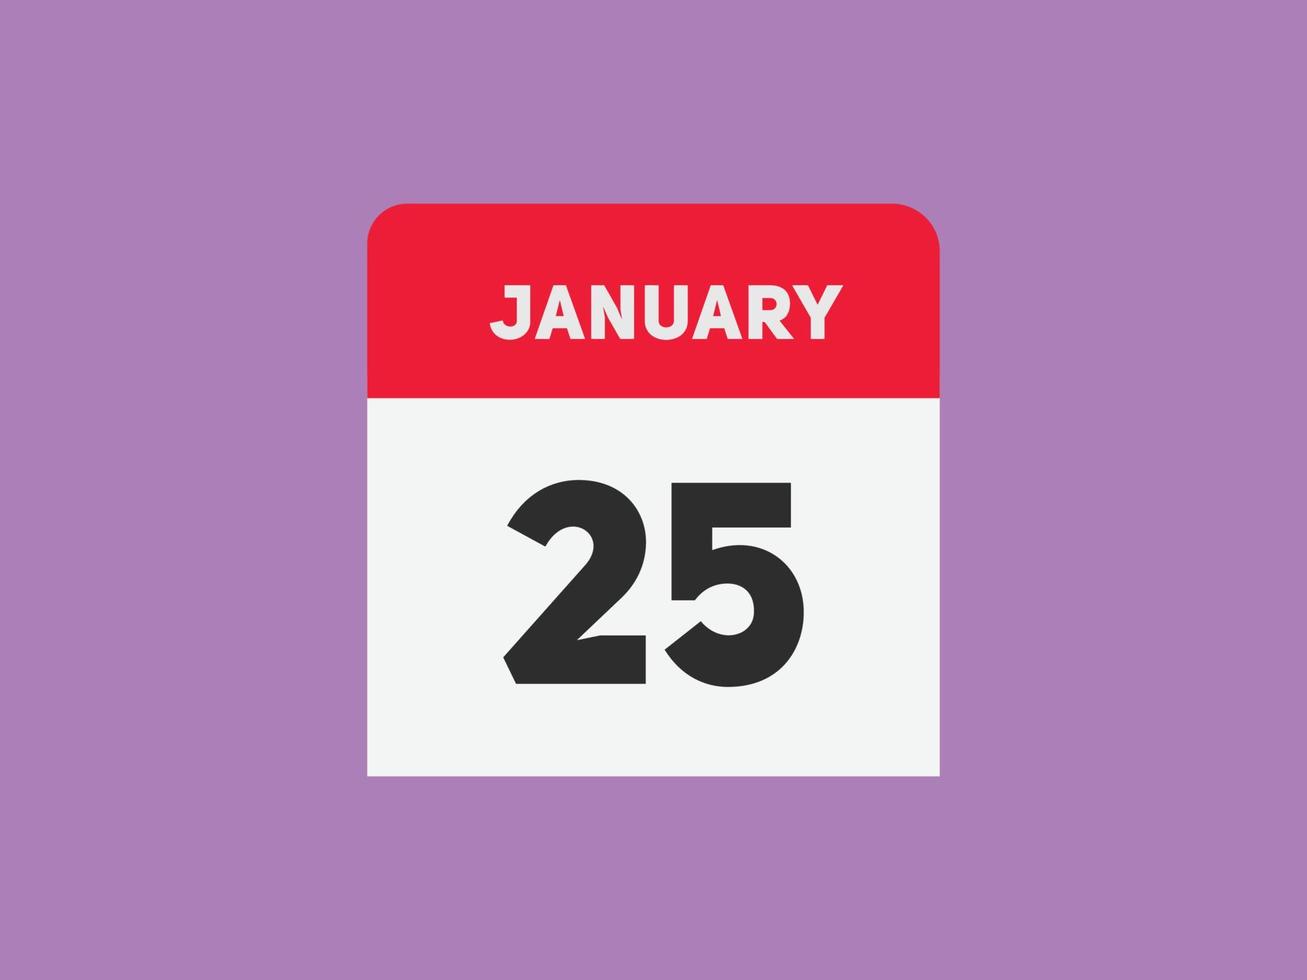 january 25 calendar reminder. 25th january daily calendar icon template. Calendar 25th january icon Design template. Vector illustration